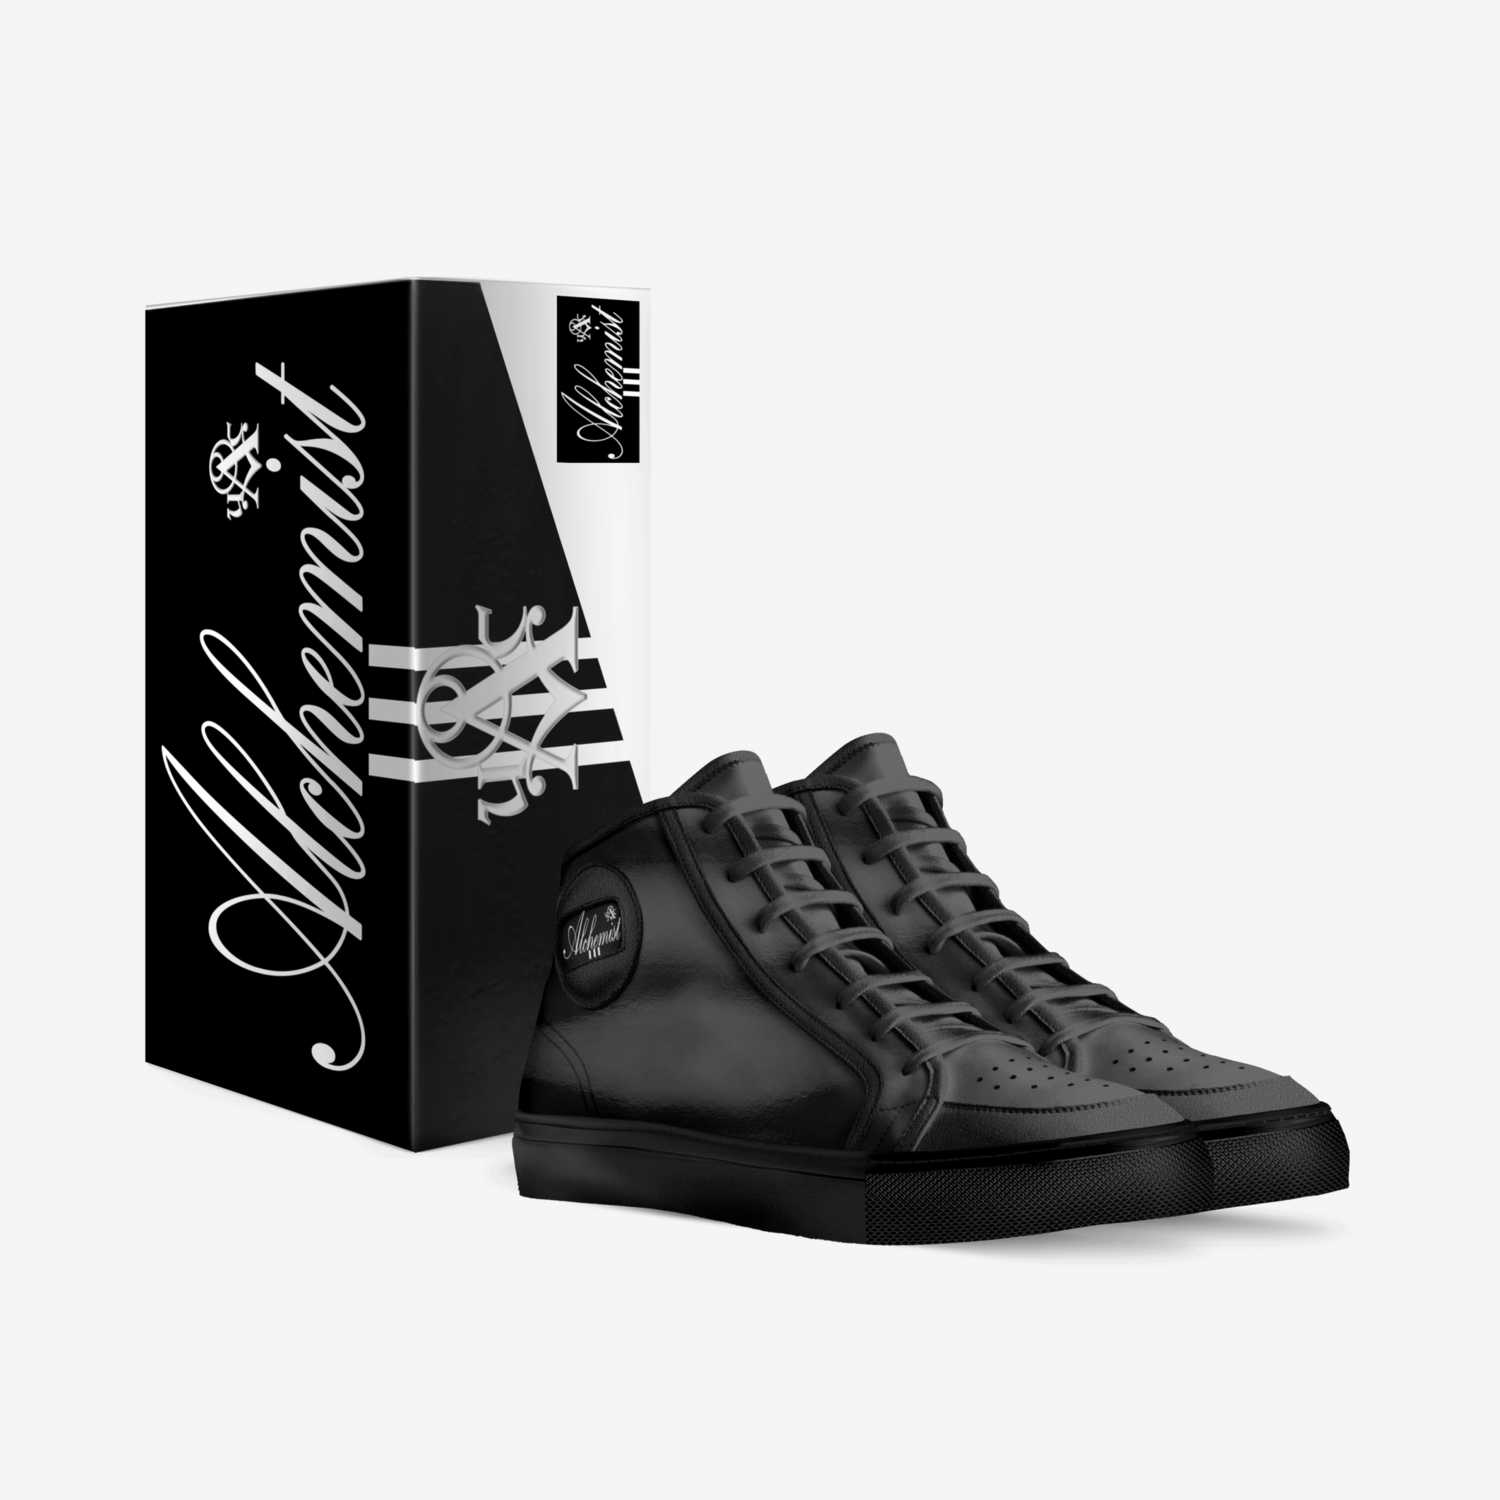 Ten Toes Down custom made in Italy shoes by Urban Alchemist Clothing | Box view